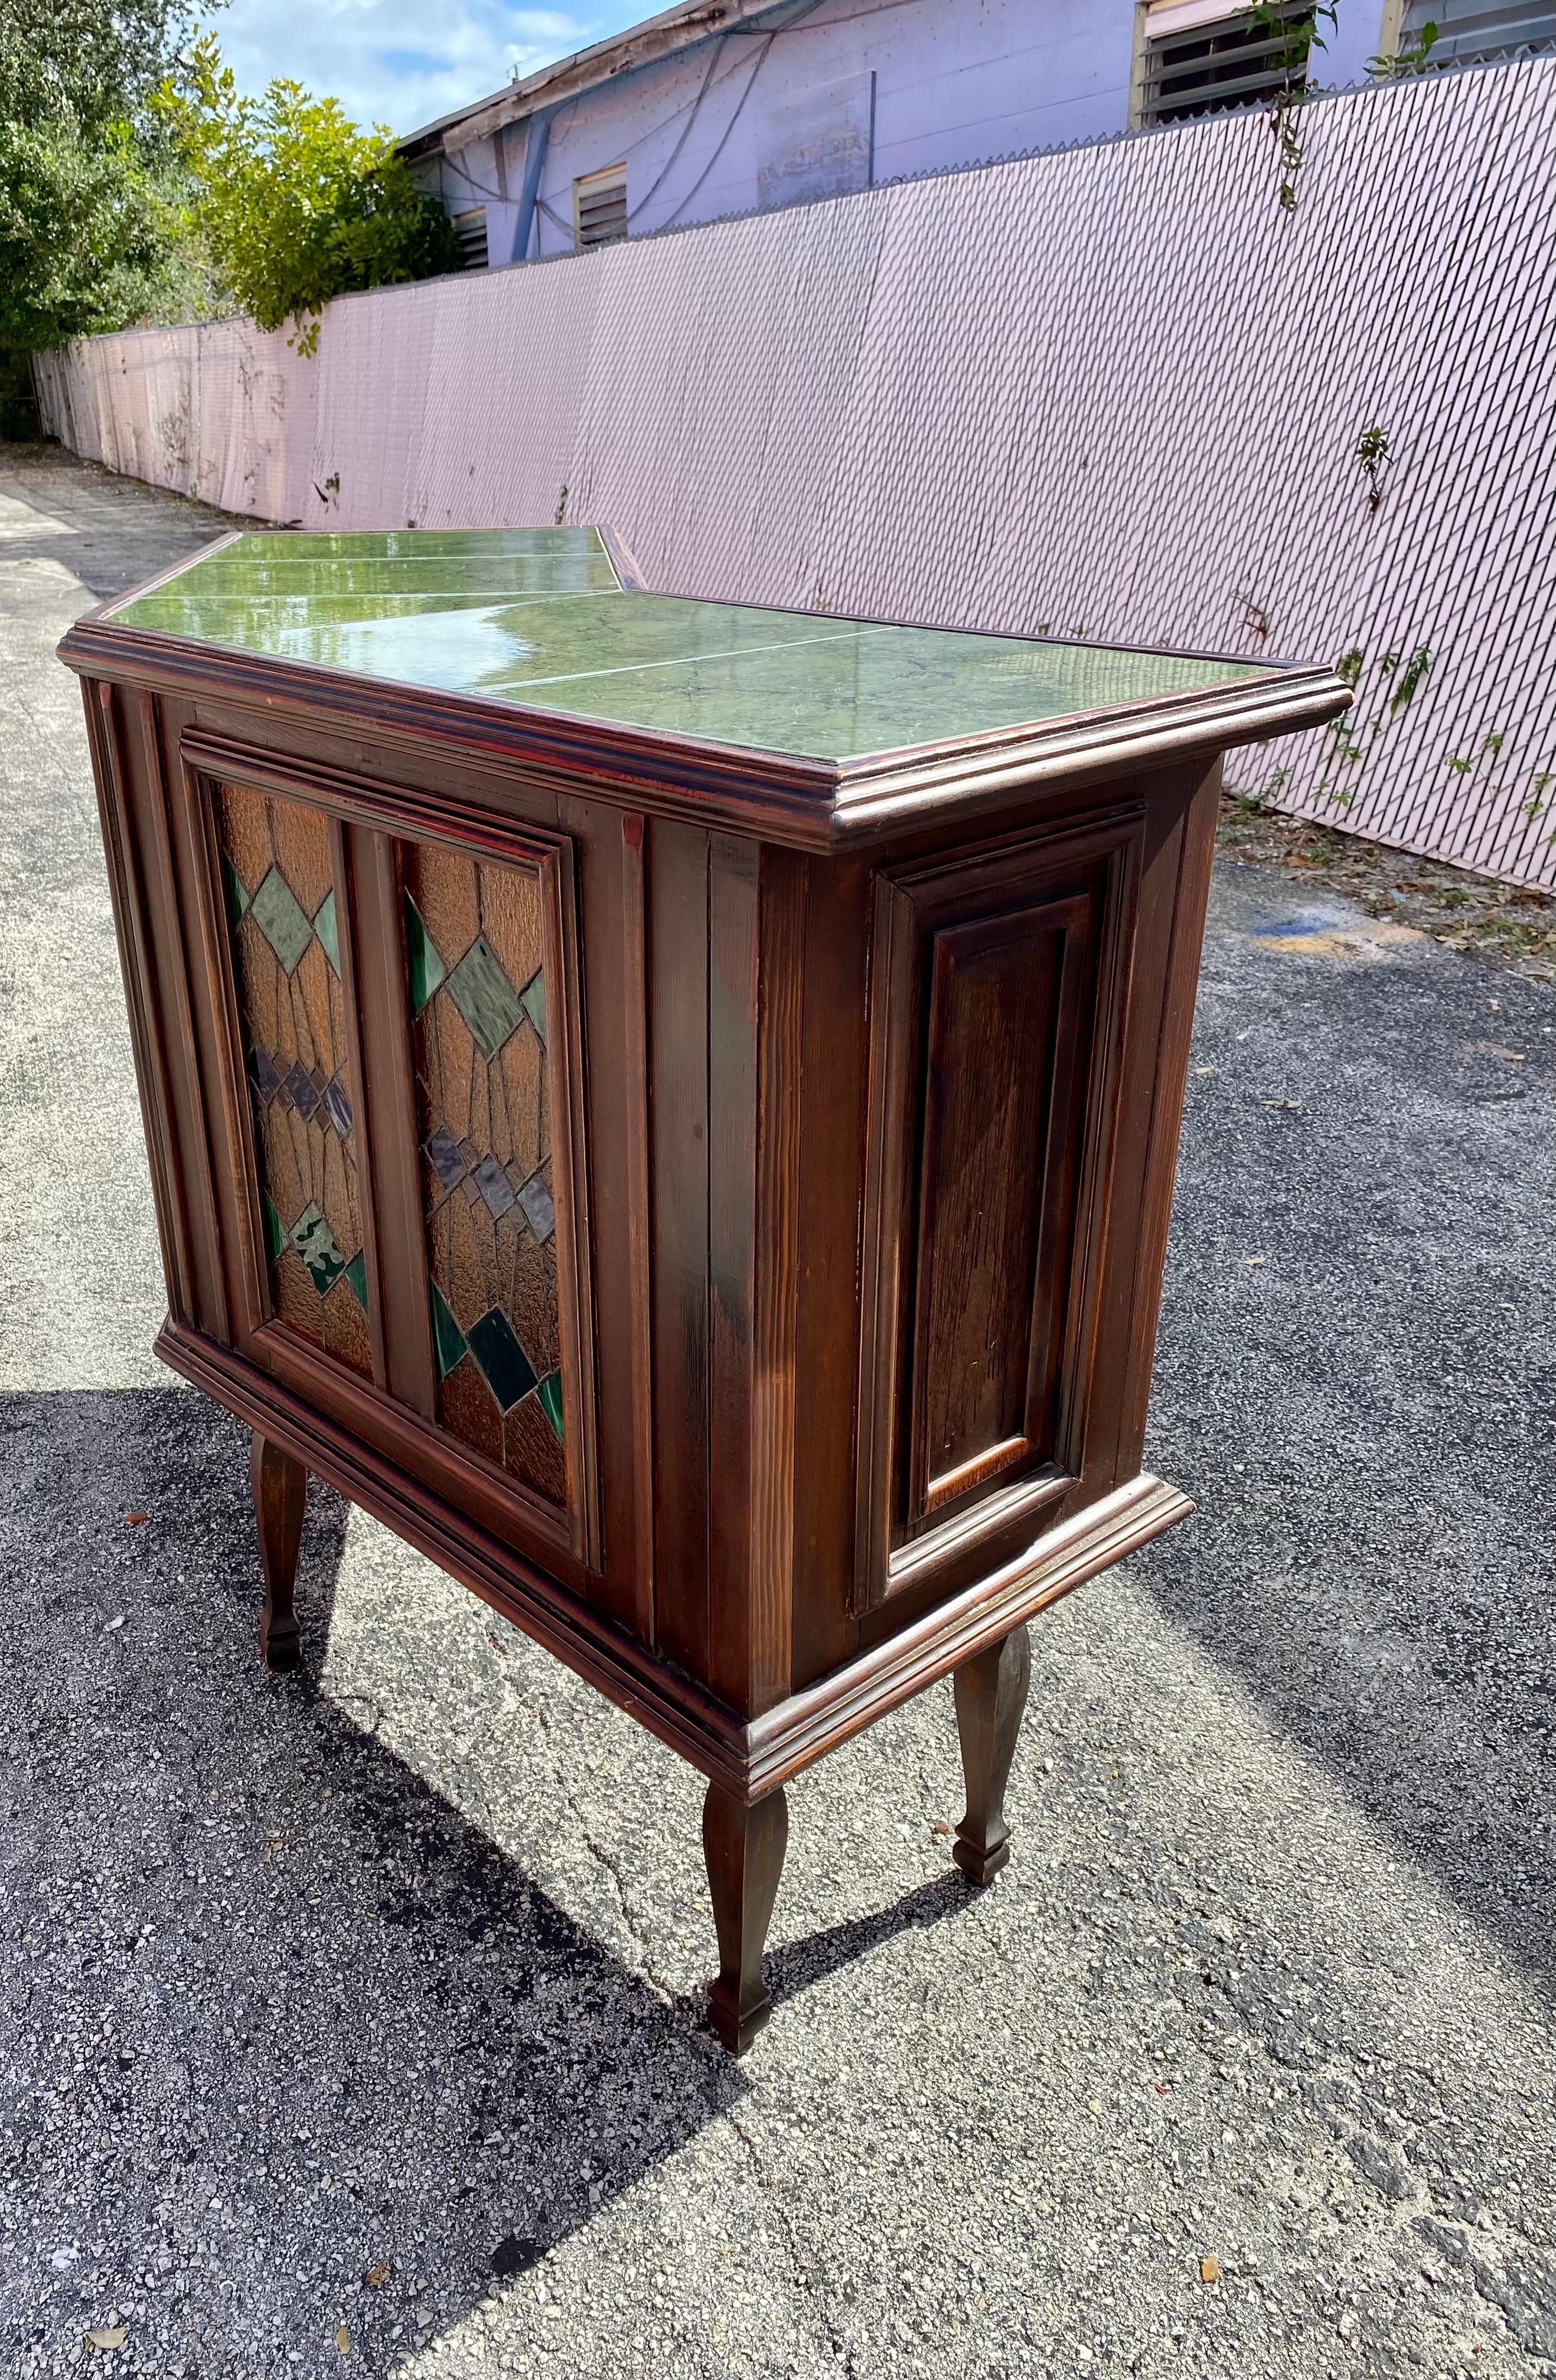 Mid-20th Century 1940s Art Deco Angular Marble Tile Stained Glass Bar Cabinet Console For Sale